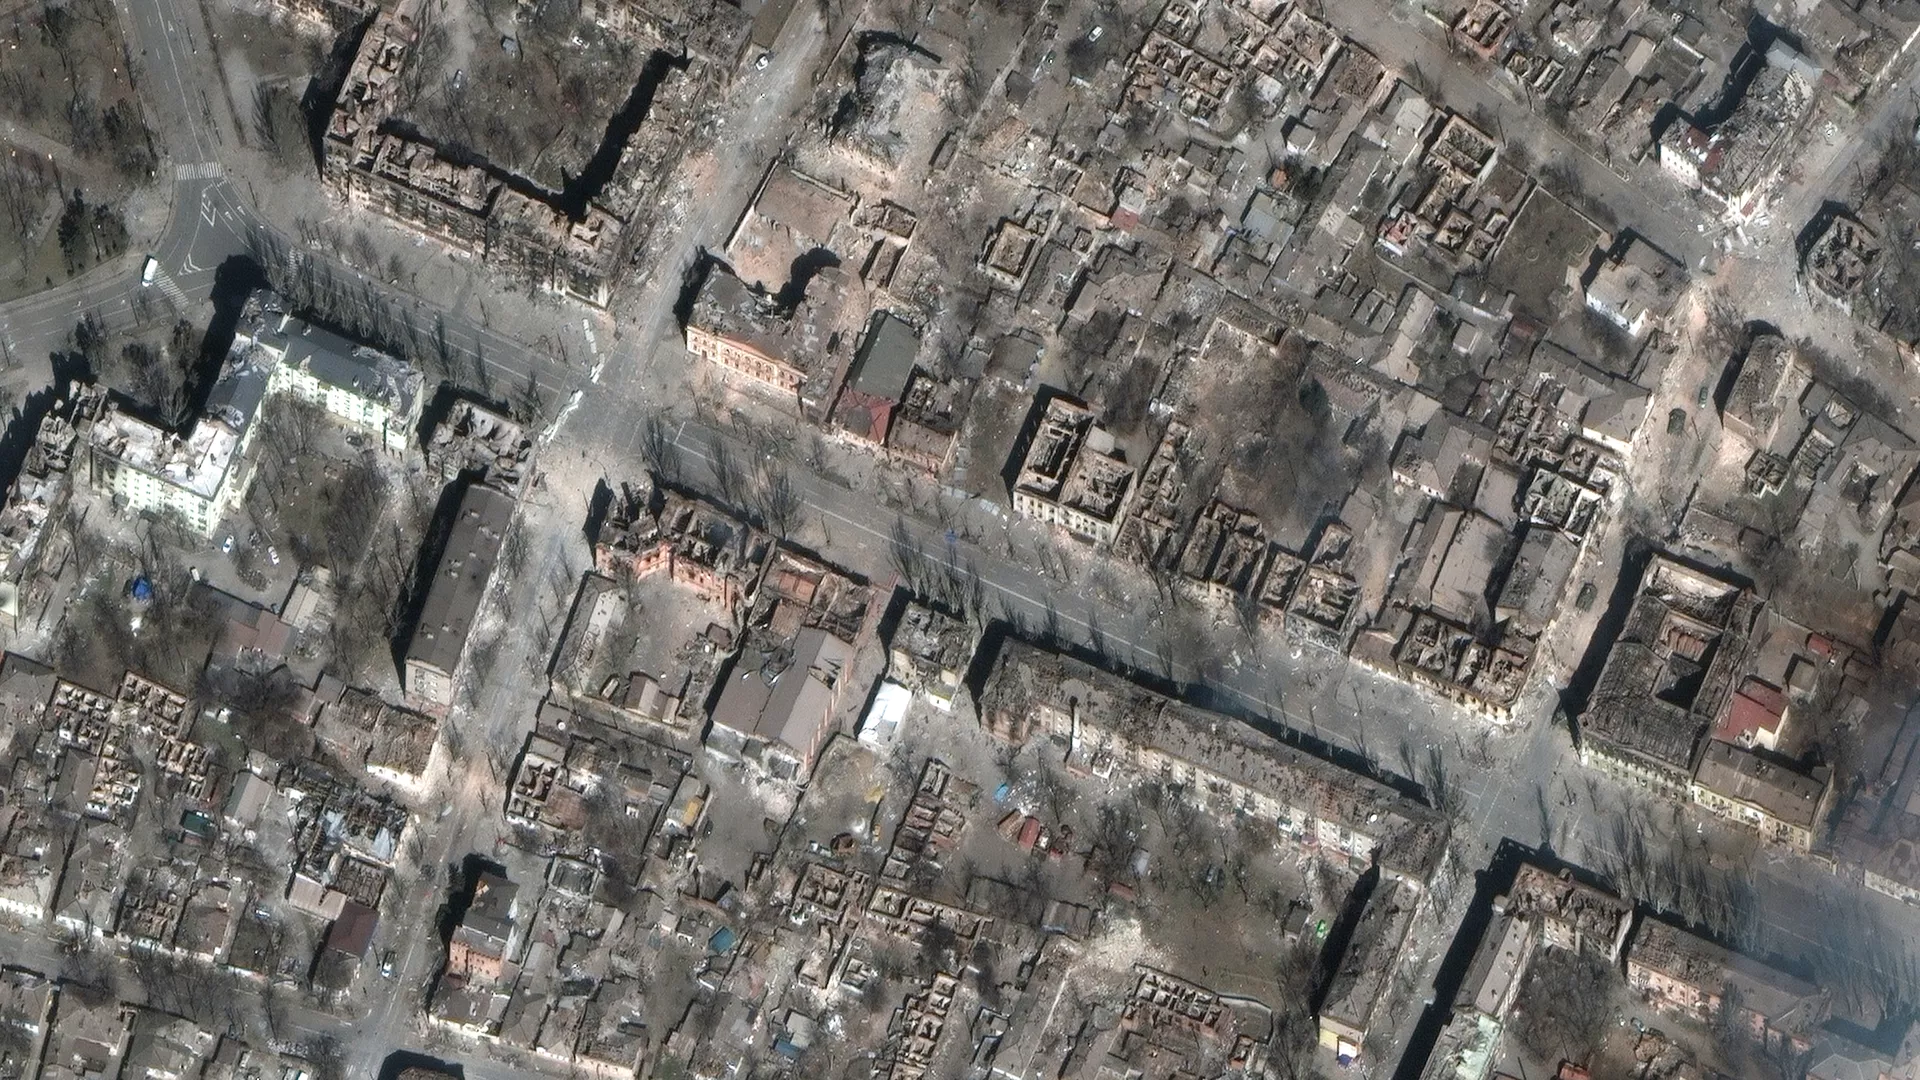 Photo: Mariupol after weeks of russian shelling